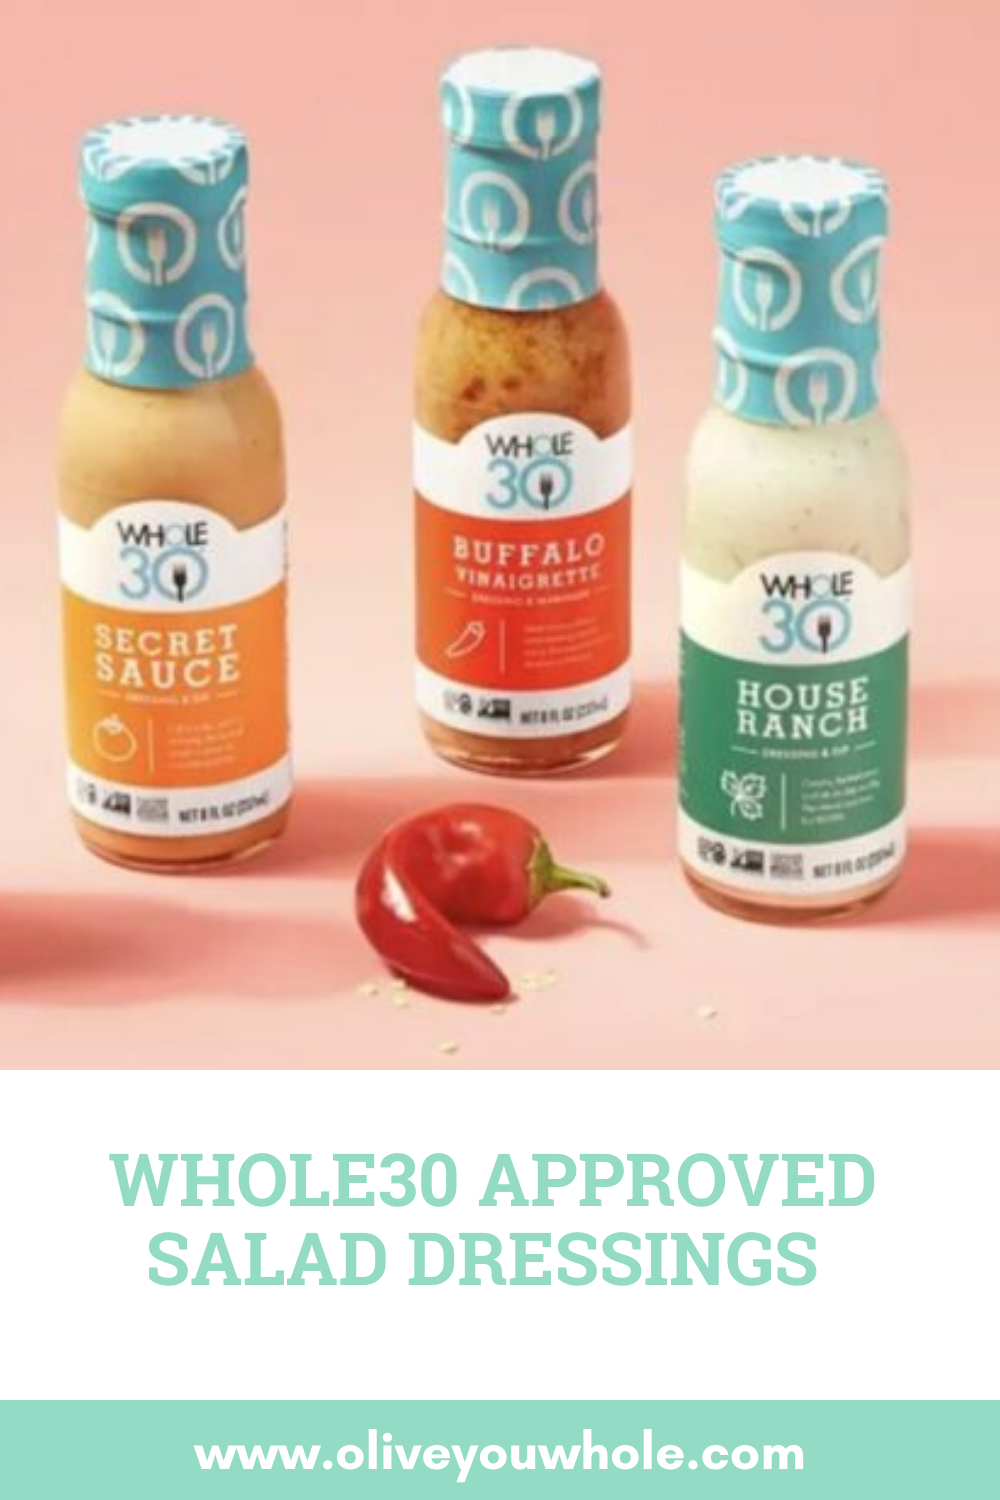 Whole30 Approved Salad Dressings 2023 - Olive You Whole